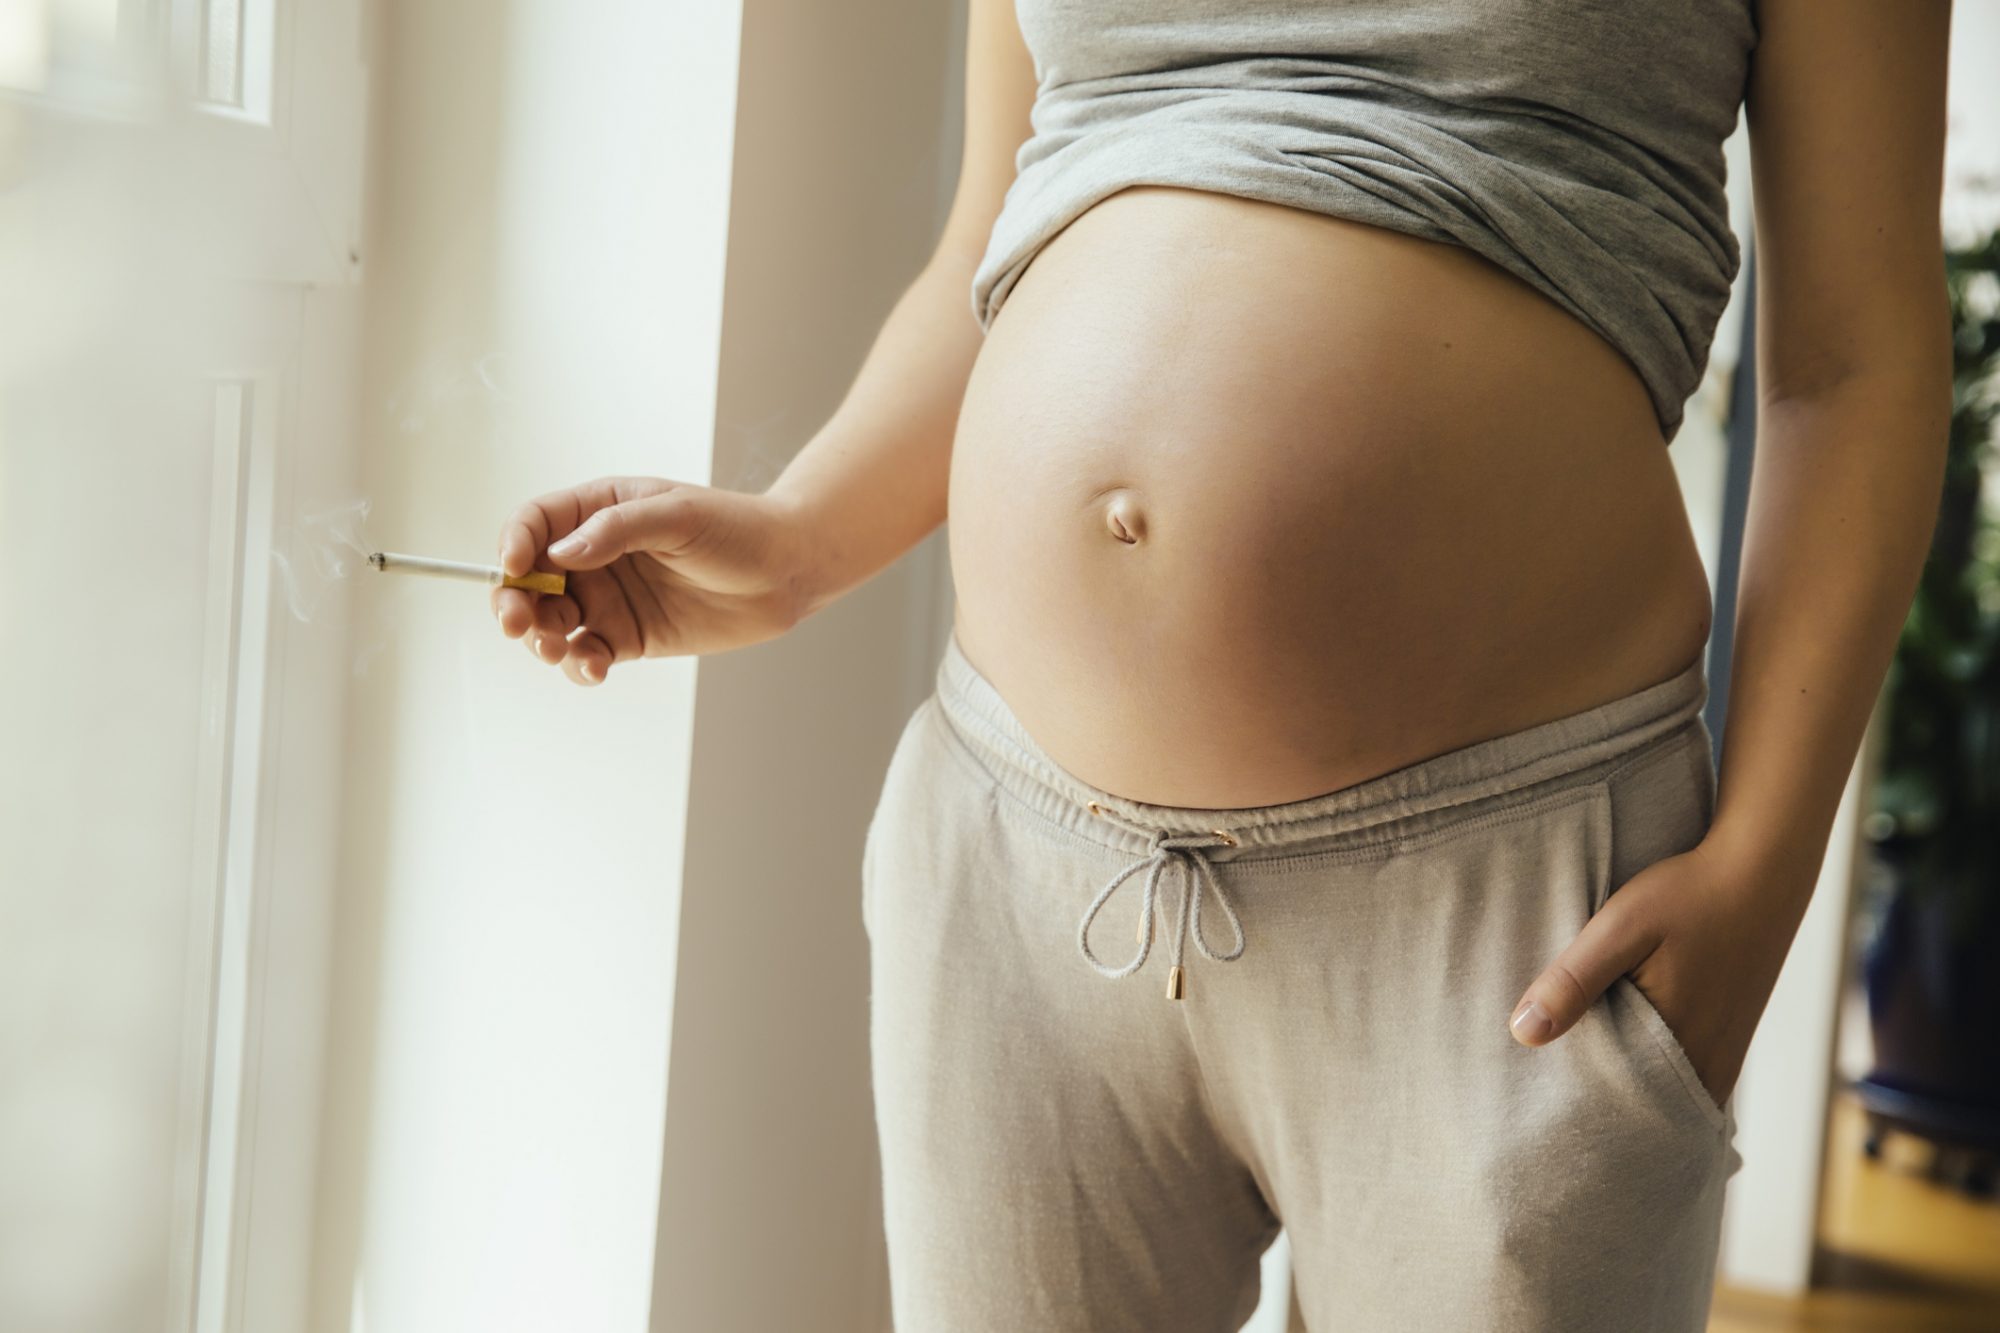 What happens to your baby if you smoke while pregnant